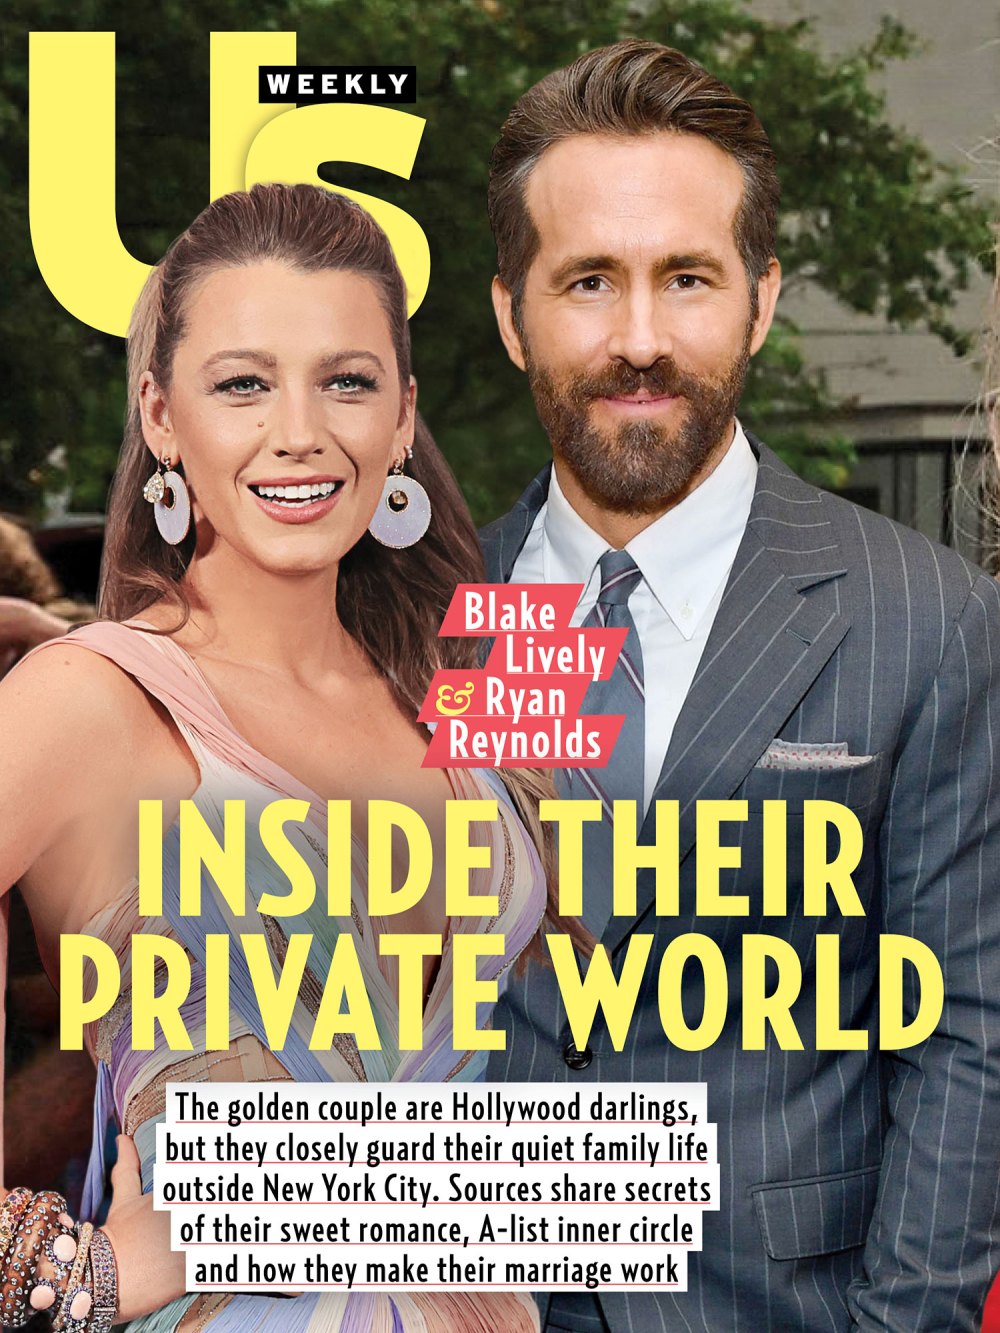 Ryan Reynolds and Blake Lively Us Weekly 2410 Cover